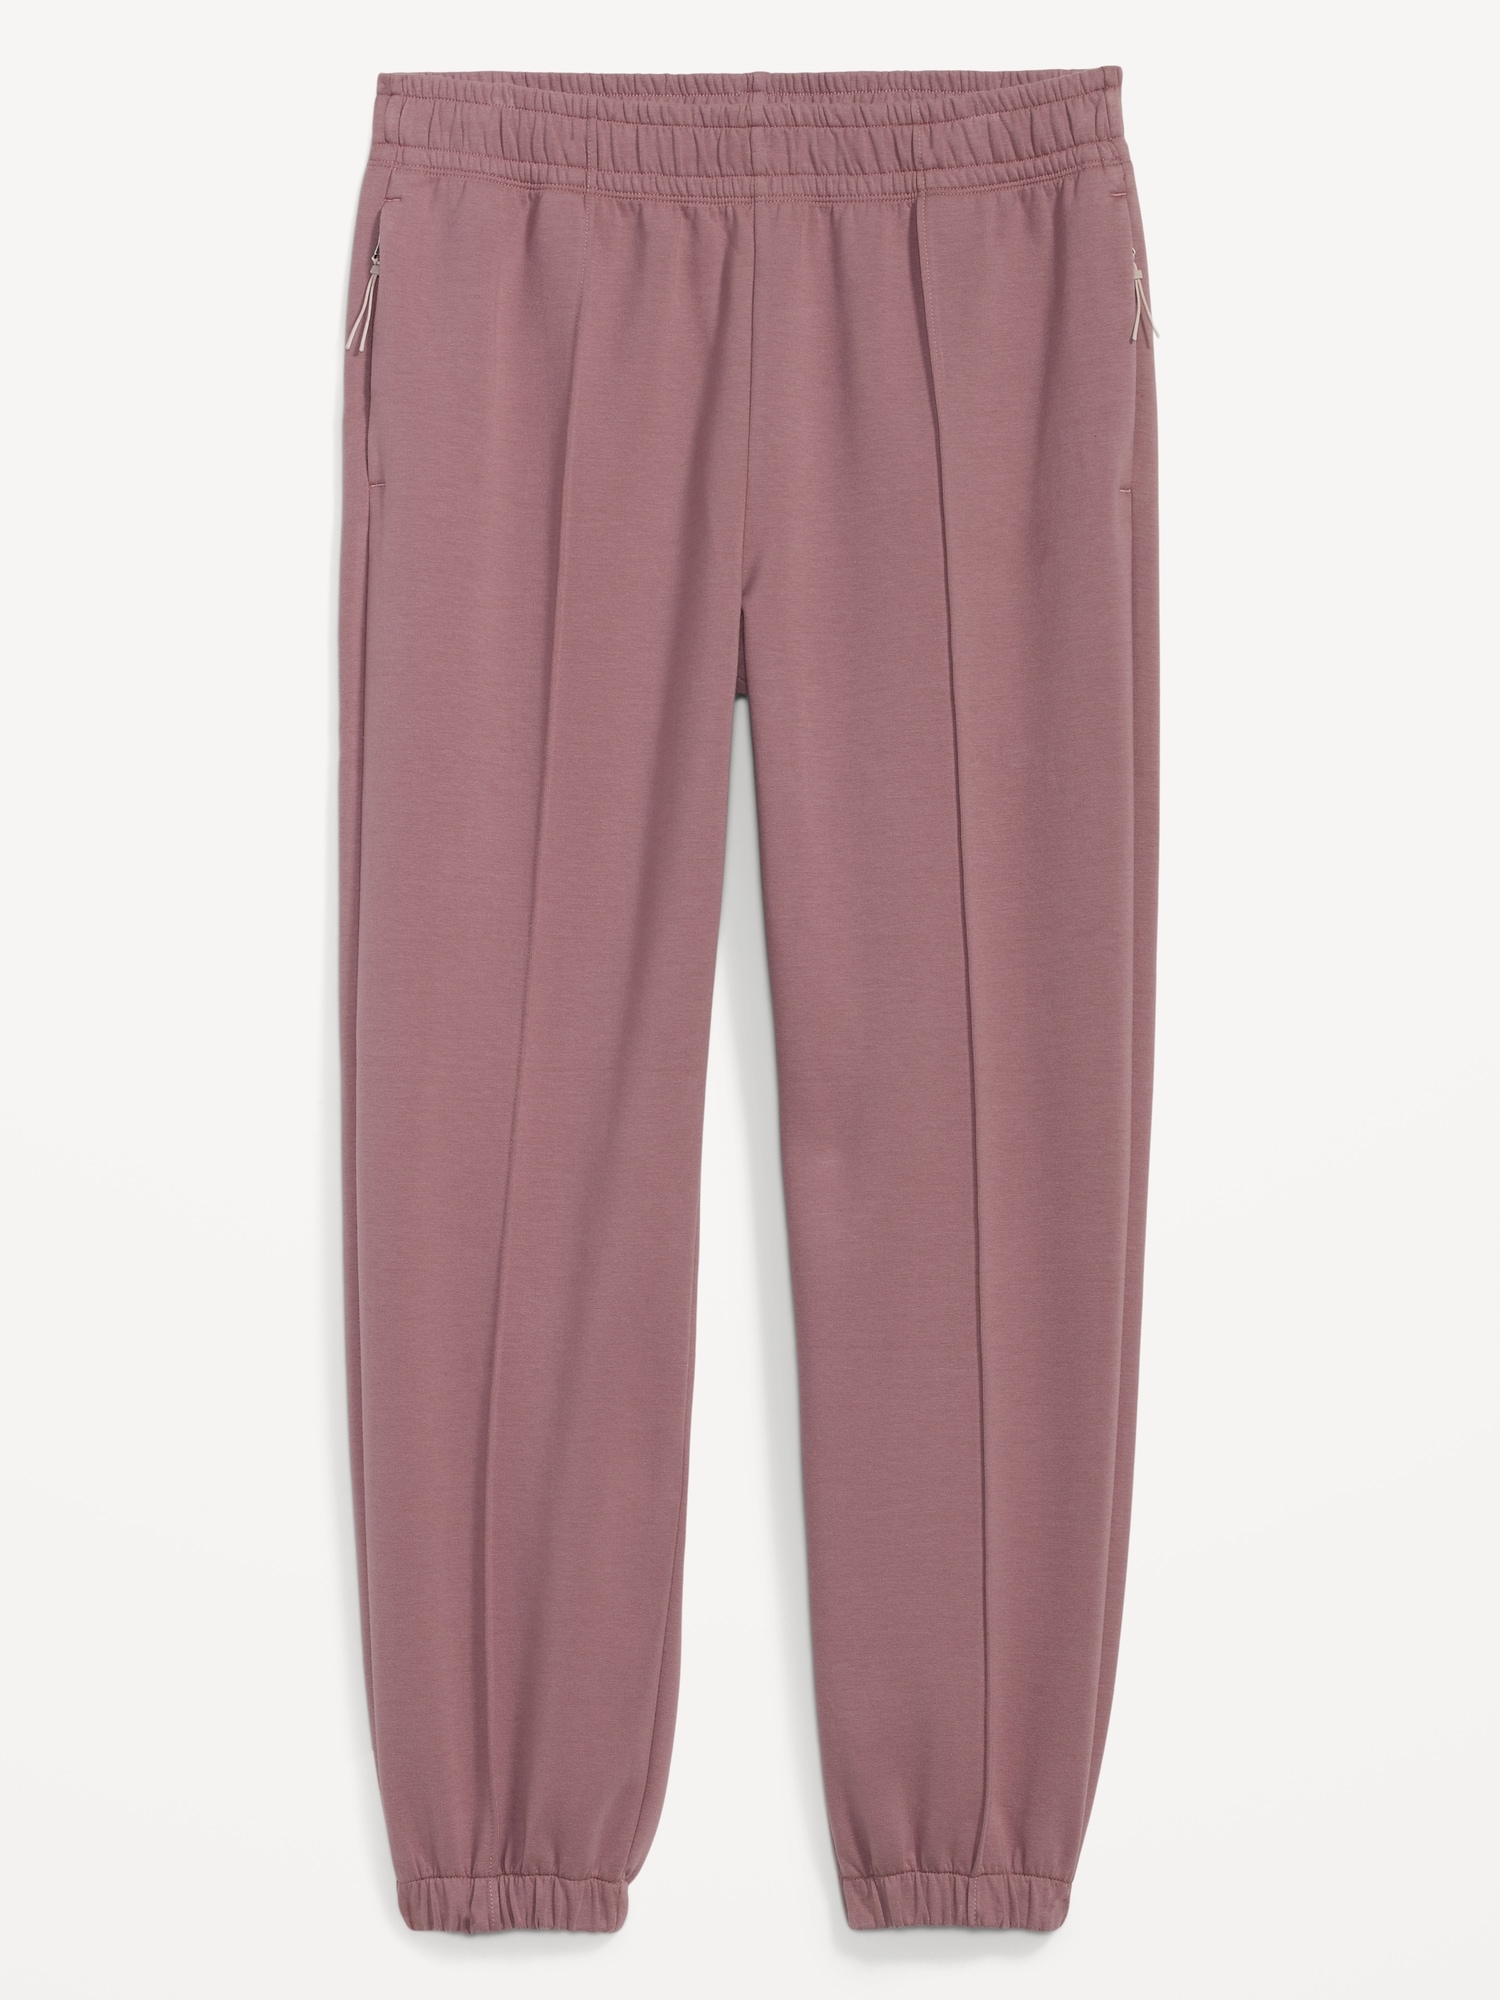 Old Navy High-Waisted Dynamic Fleece Pintucked Sweatpants for Women pink. 1